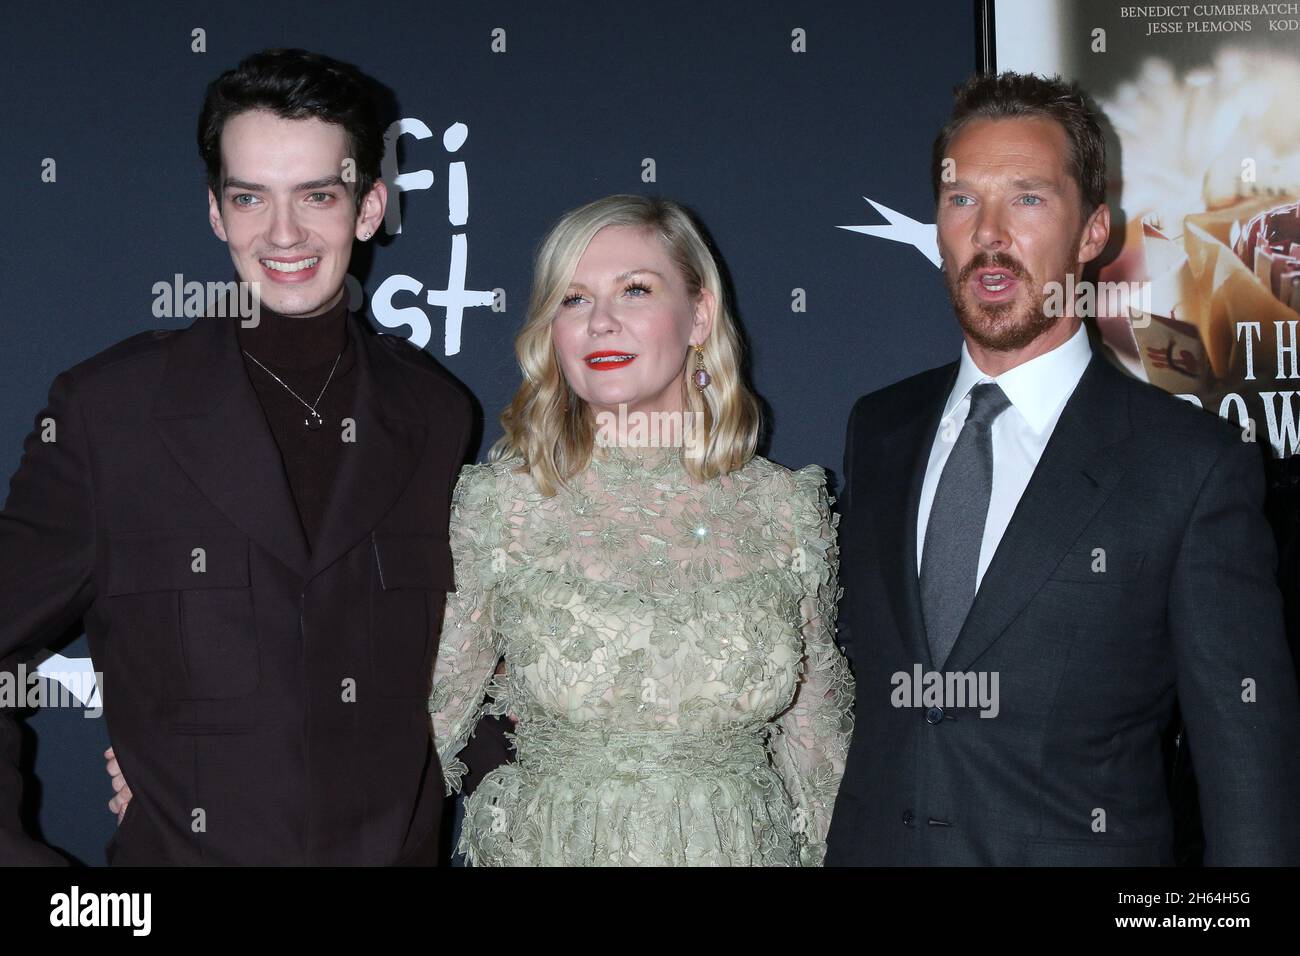 LOS ANGELES - NOV 11:  Kodi Smit-McPhee, Kirsten Dunst, Benedict Cumberbatch at the AFI Fest - The Power of The Dog LA Premiere at TCL Chinese Theater IMAX on November 11, 2021 in Los Angeles, CA Stock Photo